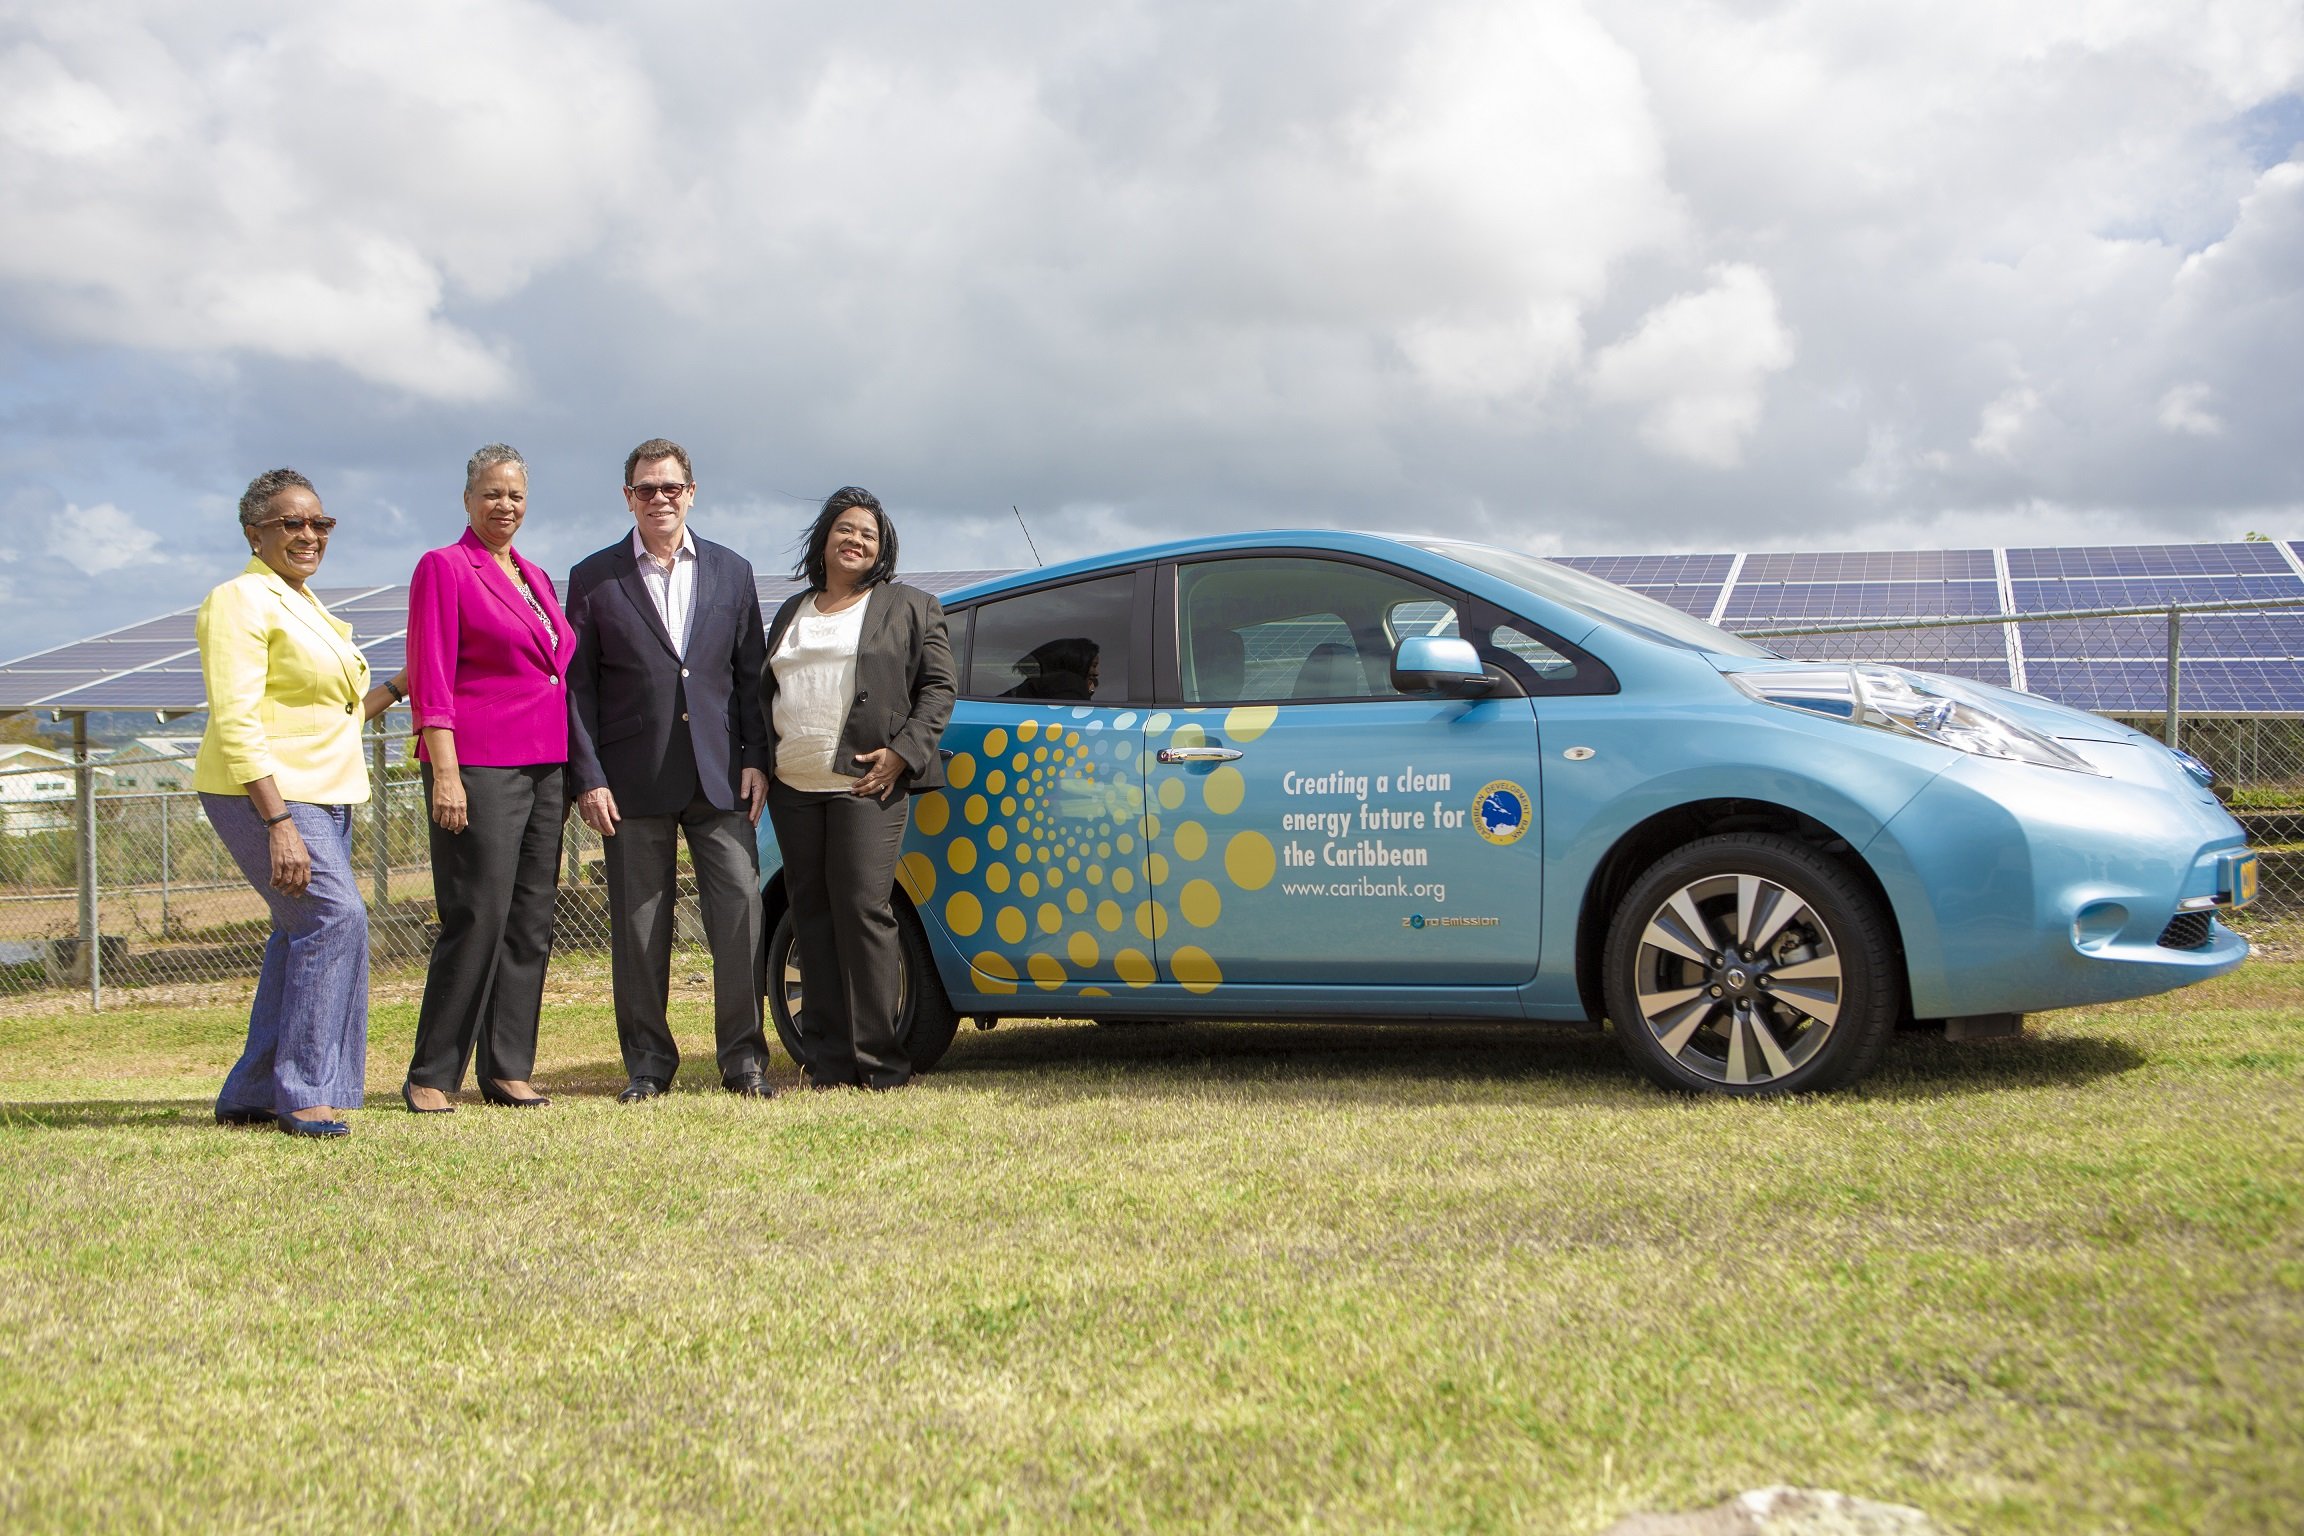 Left to right: Tessa Williams Robertson, Head, Renewable Energy and Energy Efficiency Unit; Monica La Bennett, Vice-President (Operations); Dr. William Warren Smith, President; and Yvette Lemonias Seale, Vice-President (Corporate Services) and Bank Secretary during a photo opportunity at CDB’s Headquarters in Barbados.